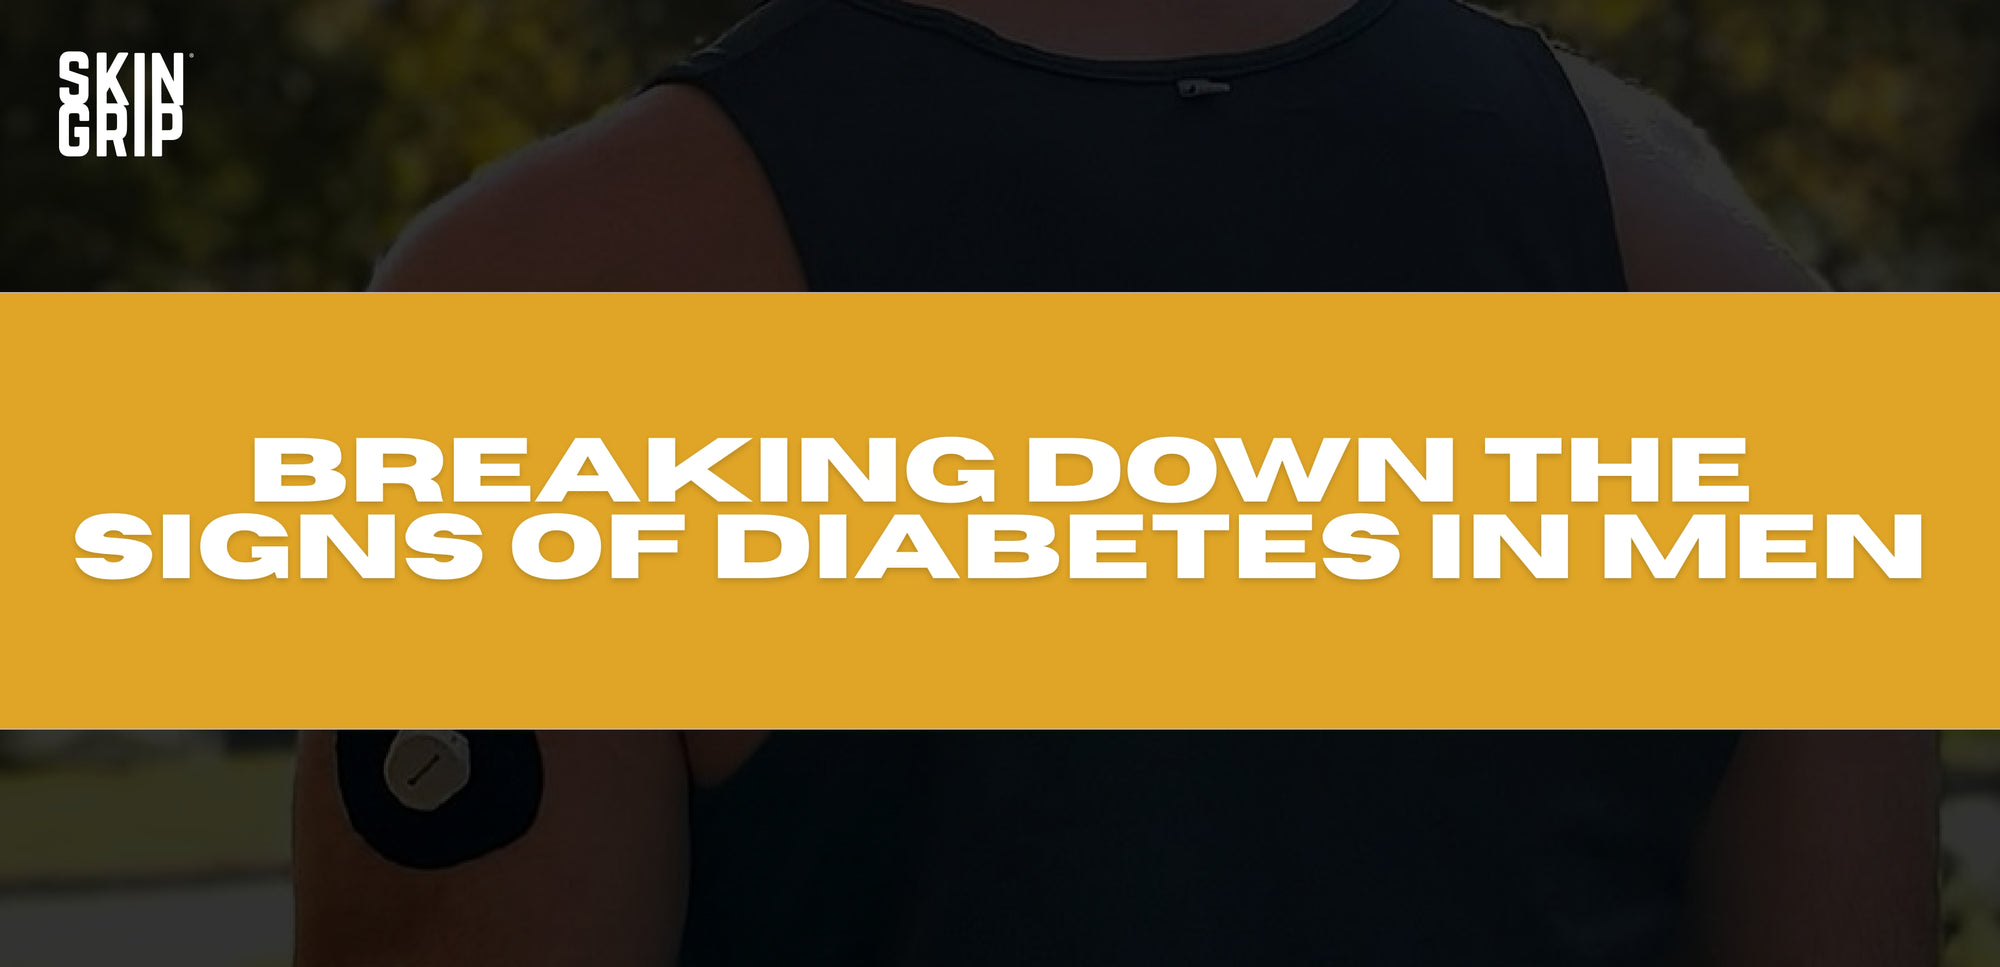 Breaking Down the Signs of Diabetes in Men: How Dexcom G7 Can Make a Difference